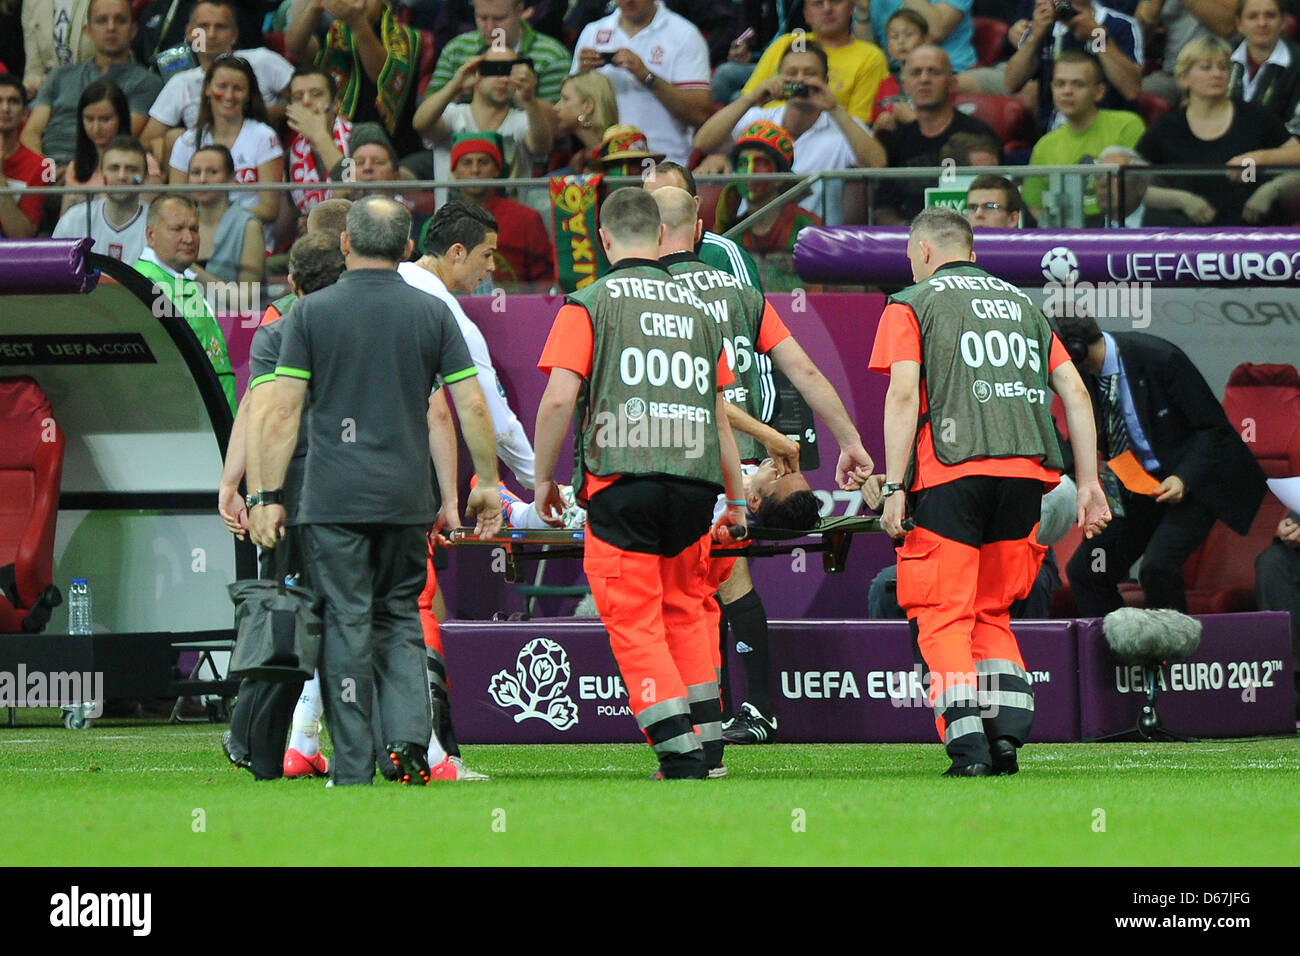 Portugal's Helder Postiga is carruied off the field with an injury during a Euro 2012 quarter final match between the Czech Republic and Portugal in Warsaw, Portugal, 21 June 2012. Photo: Revierfoto Stock Photo